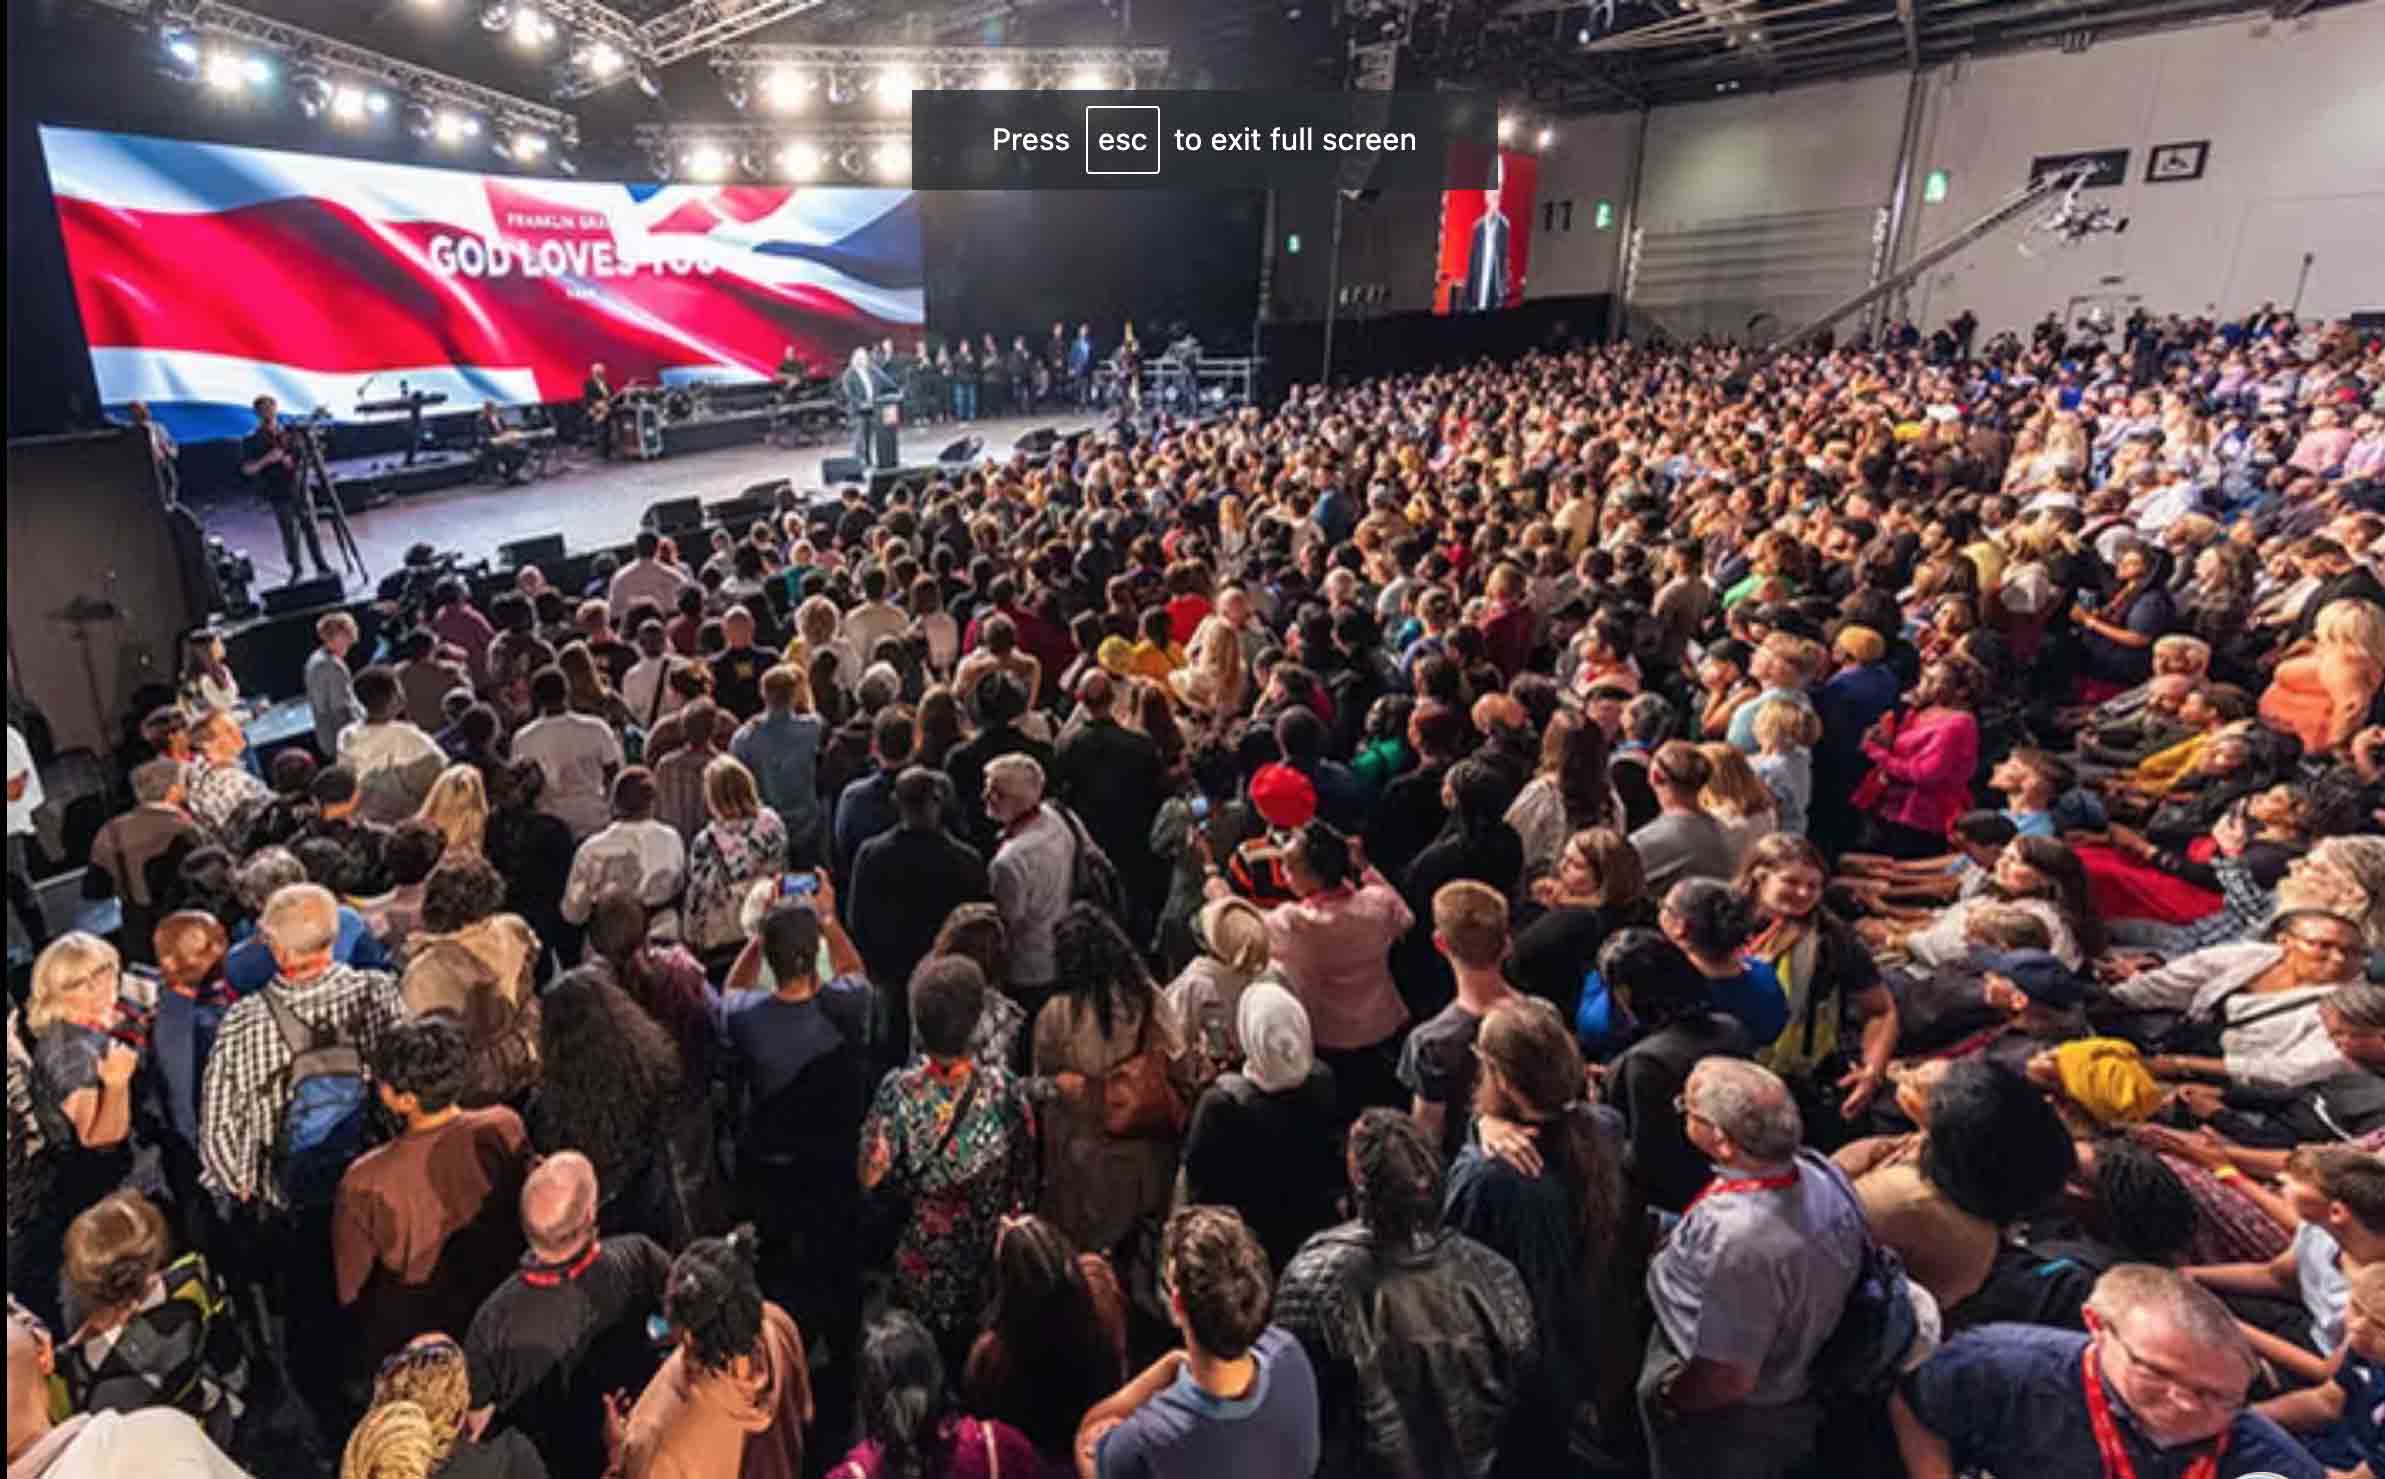 More Than 10,000 Flock to God Loves You Tour in London